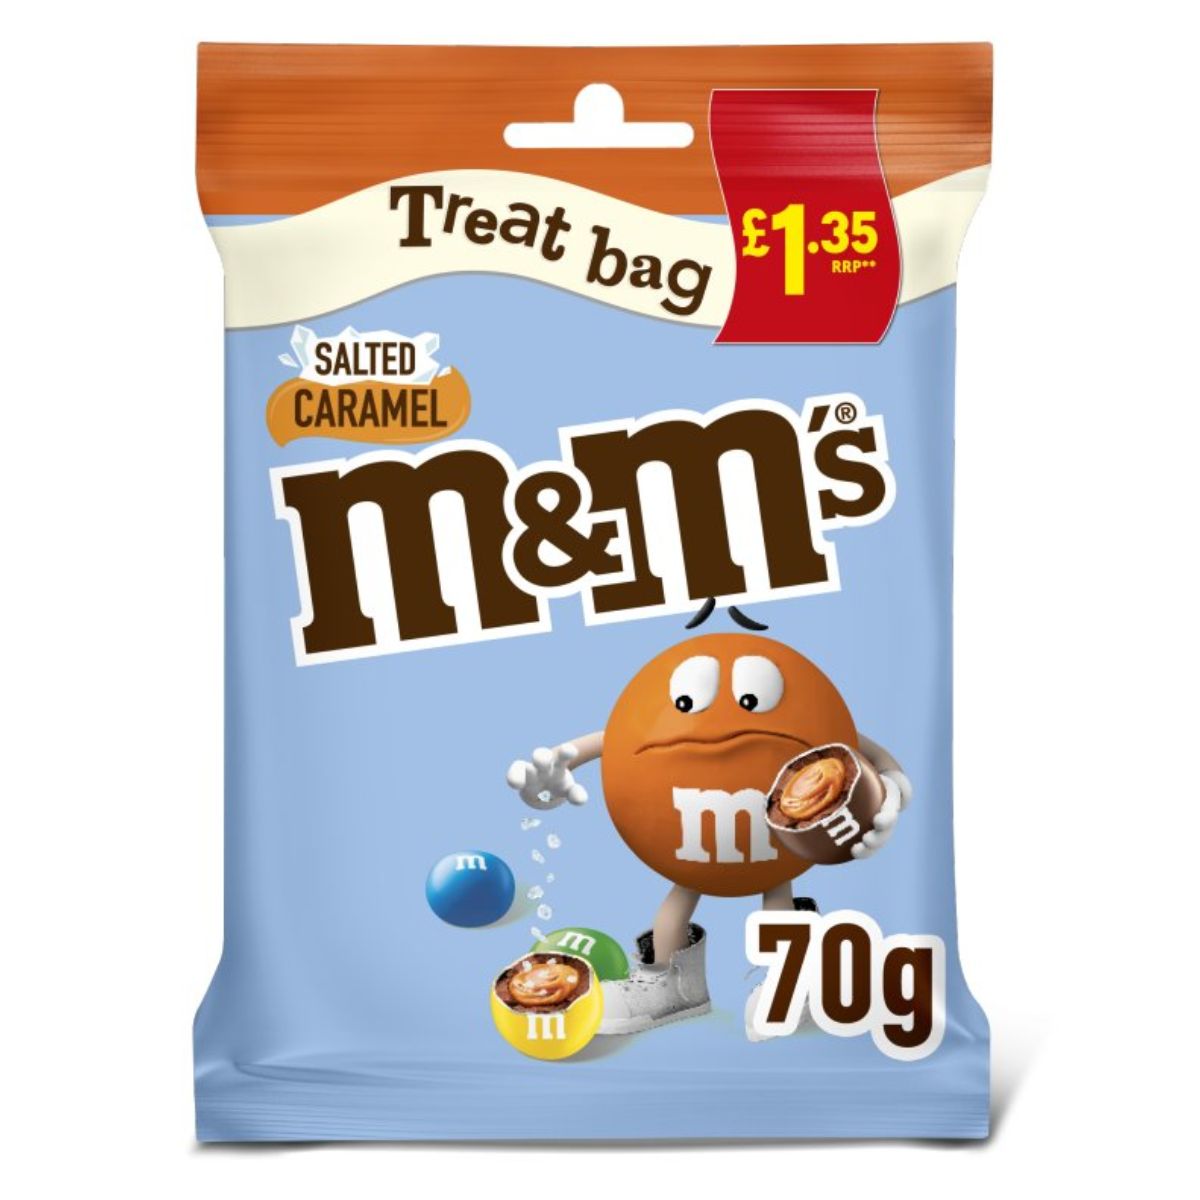 A pack of M&M s - Salted Caramel Milk Chocolate Treat Bag, showing a price tag of £1.35 and a graphic of an m&m character holding a caramel candy, with a 70g label.